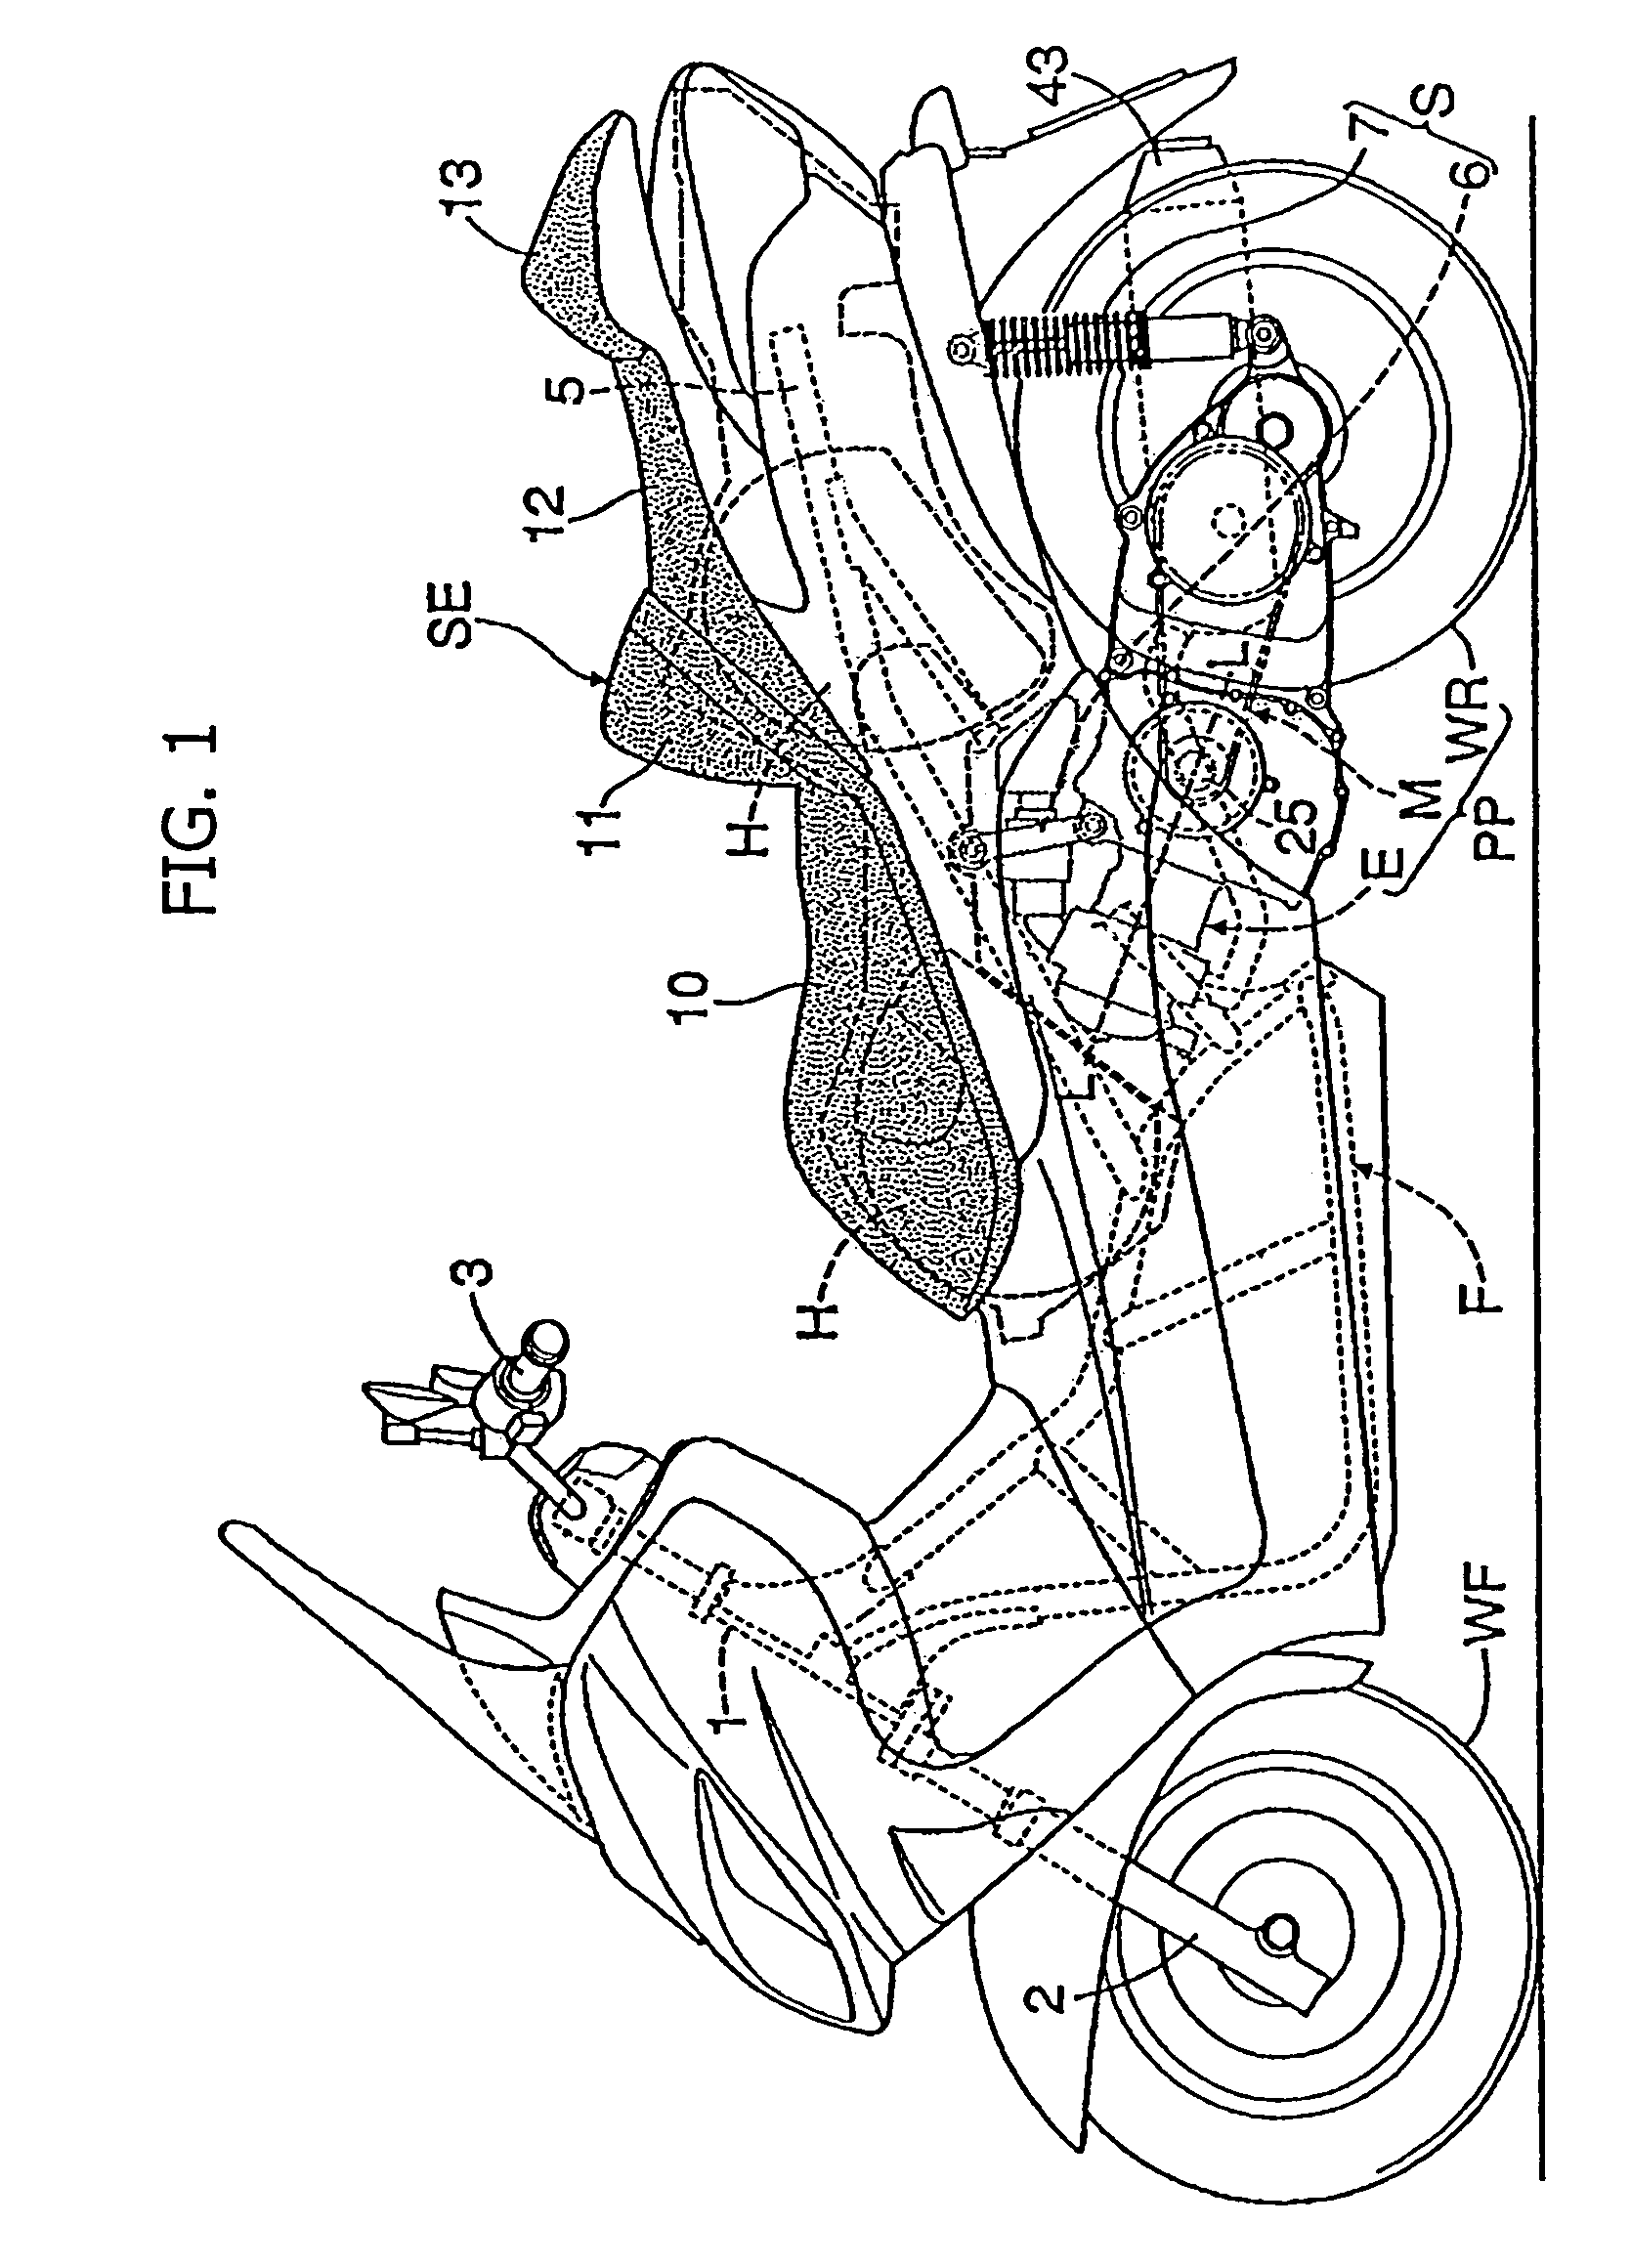 Engine configuration for a motorcycle